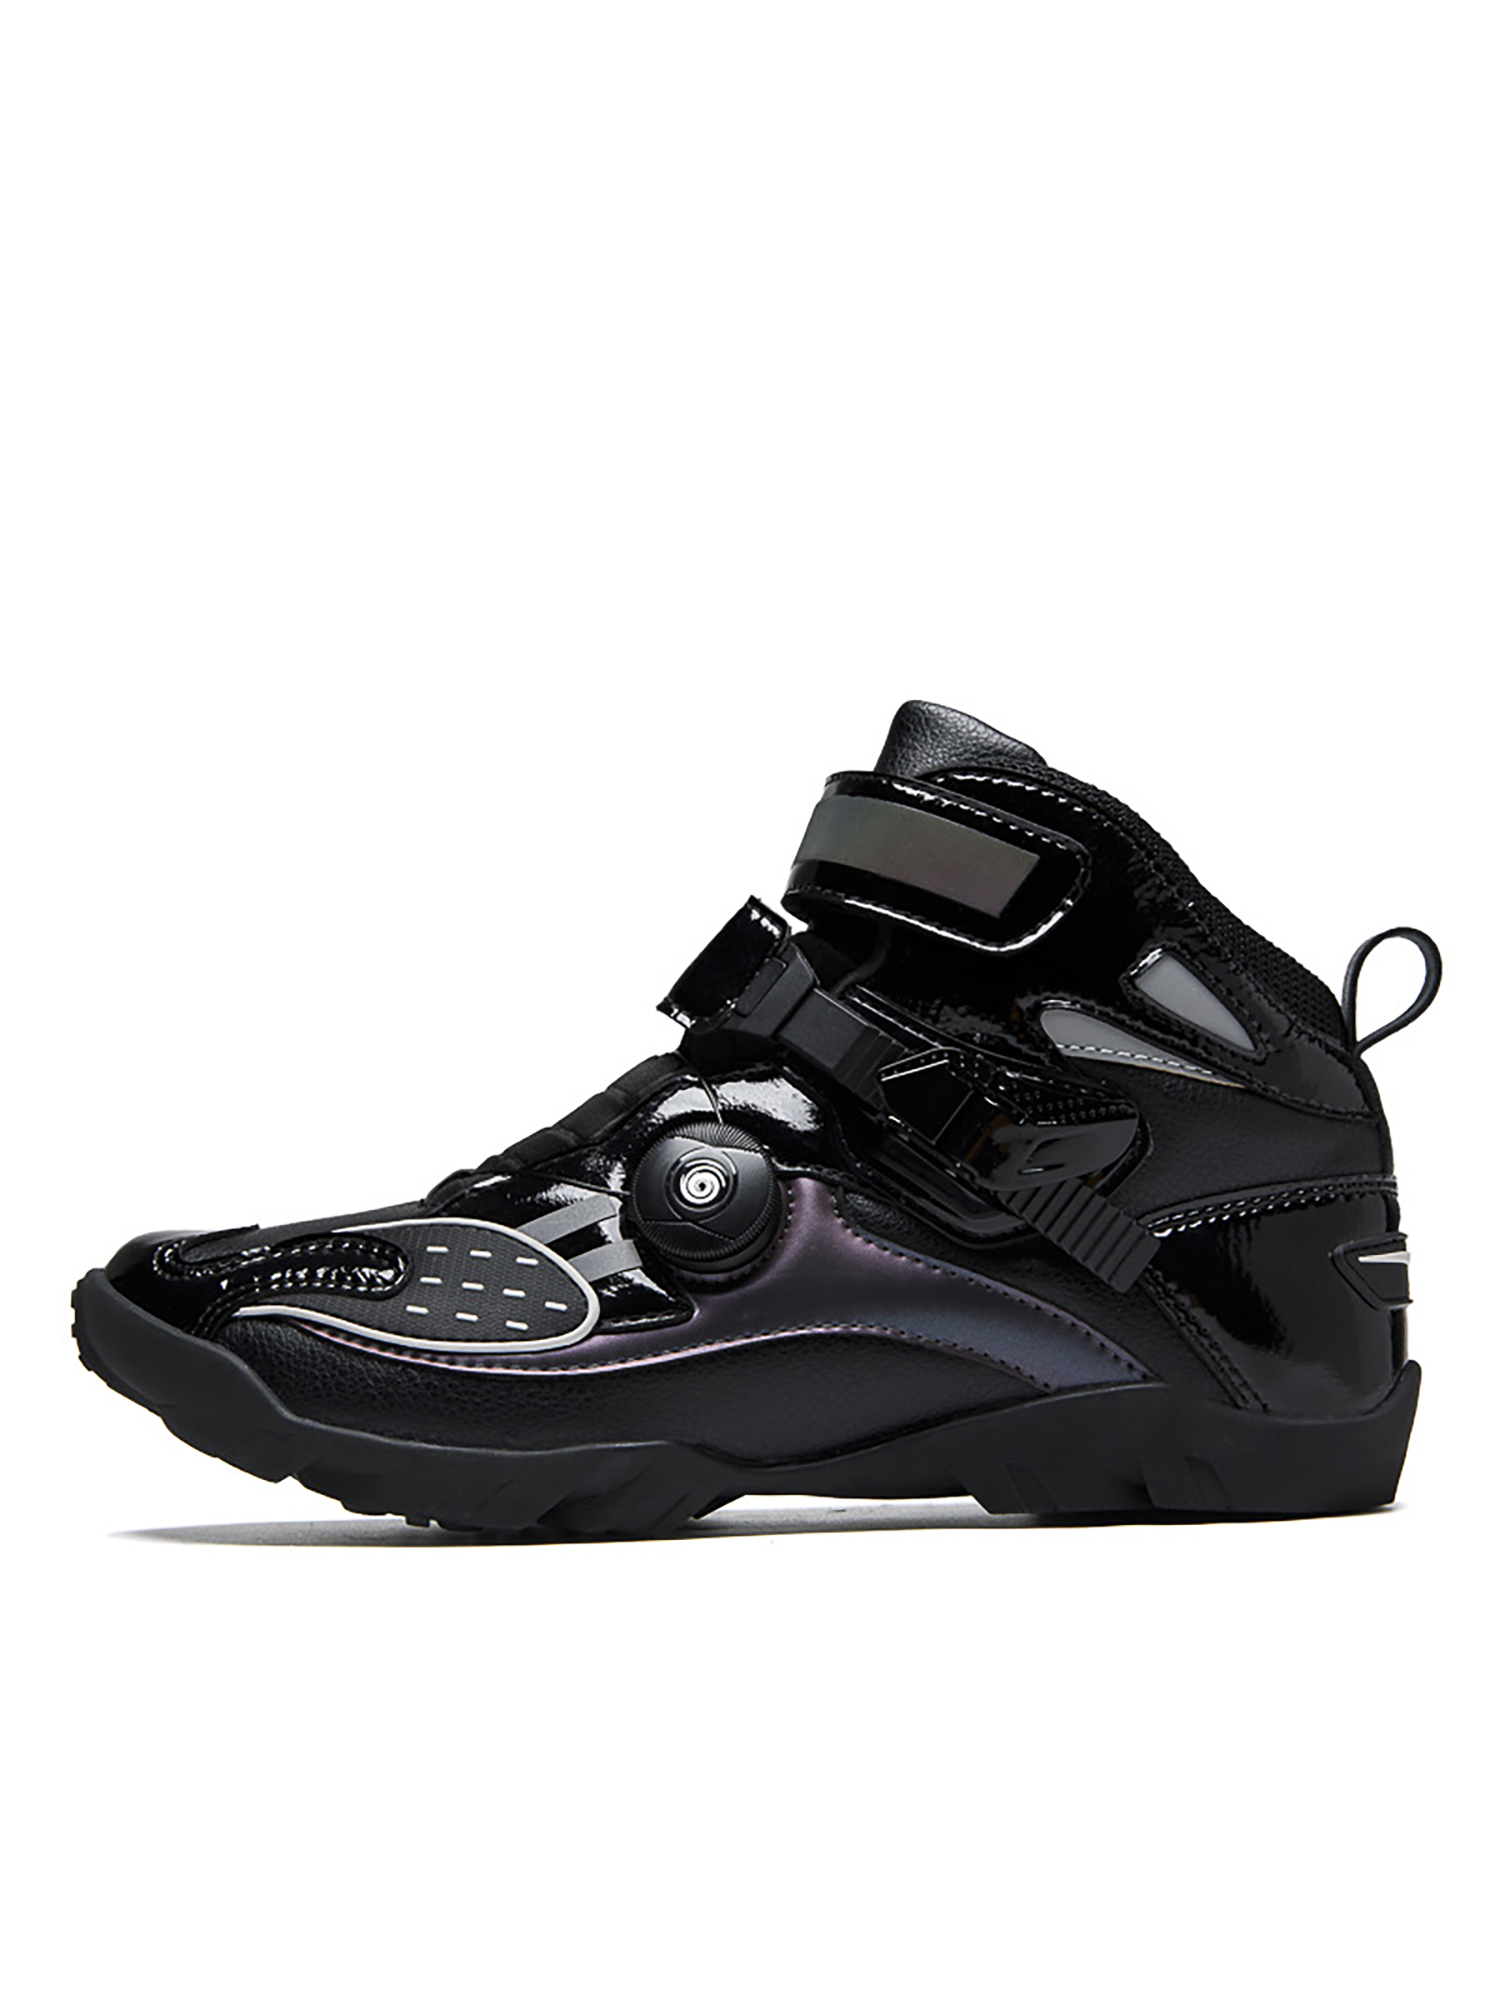 Tenmix Unisex Breathable Riding Shoes Outdoor Lightweight Racing Motorcycle Boots Casual Sports Shoe Black 7 - image 3 of 9